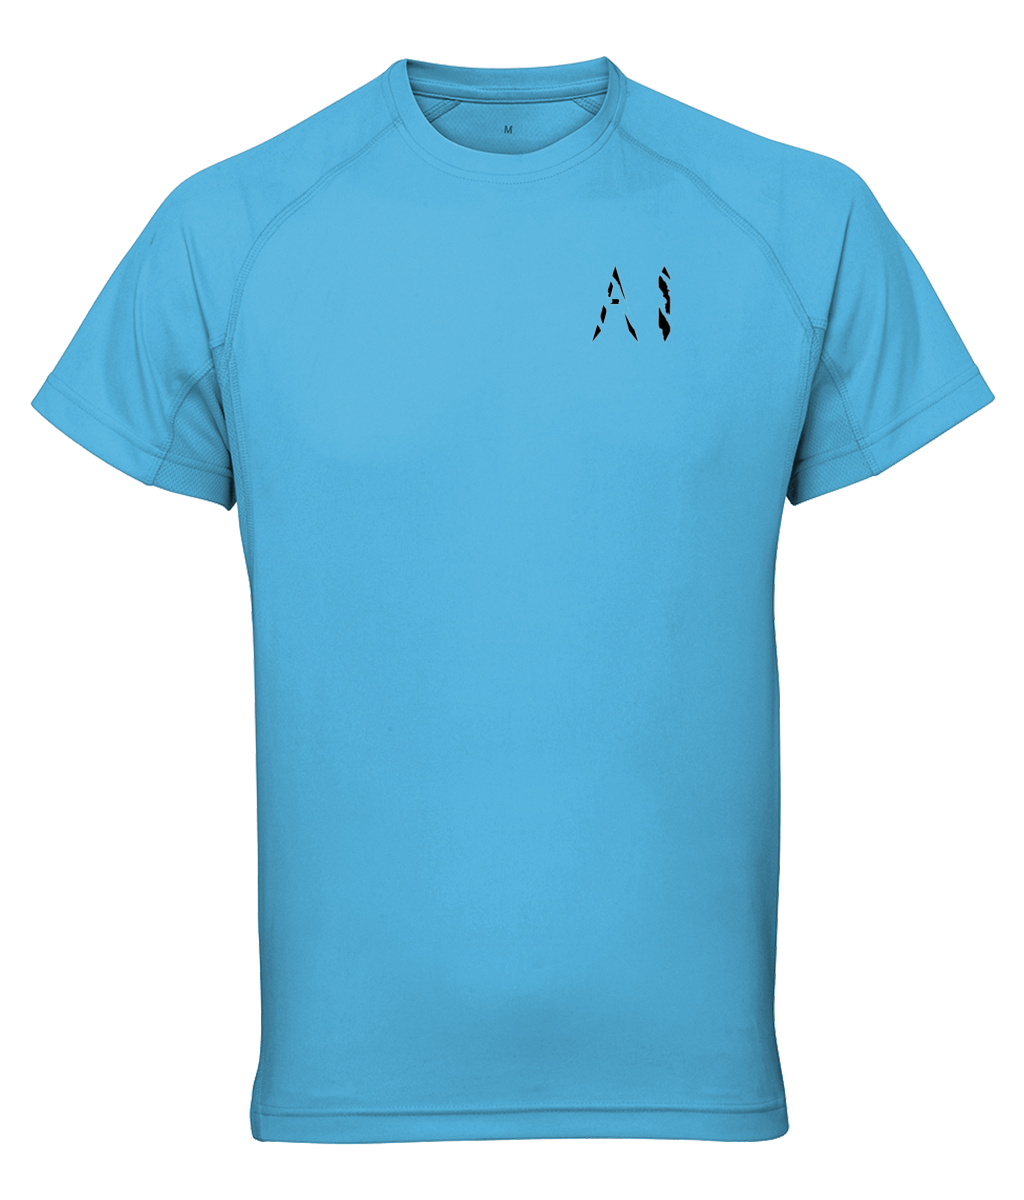 Womens teal blue Athletic Performance Top with black AI logo on left breast